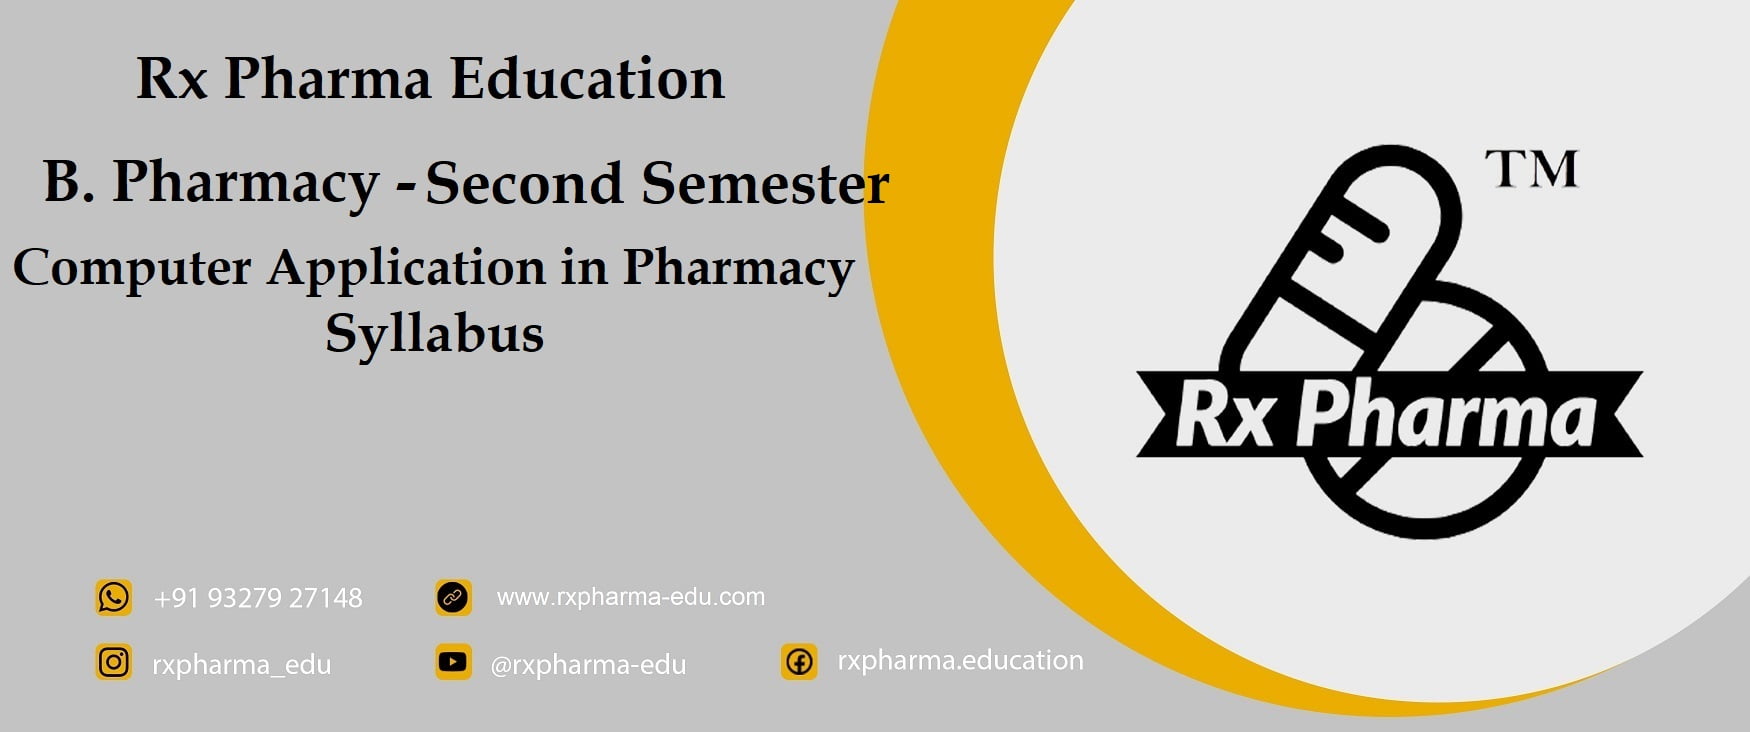 Computer Application in Pharmacy Syllabus Banner